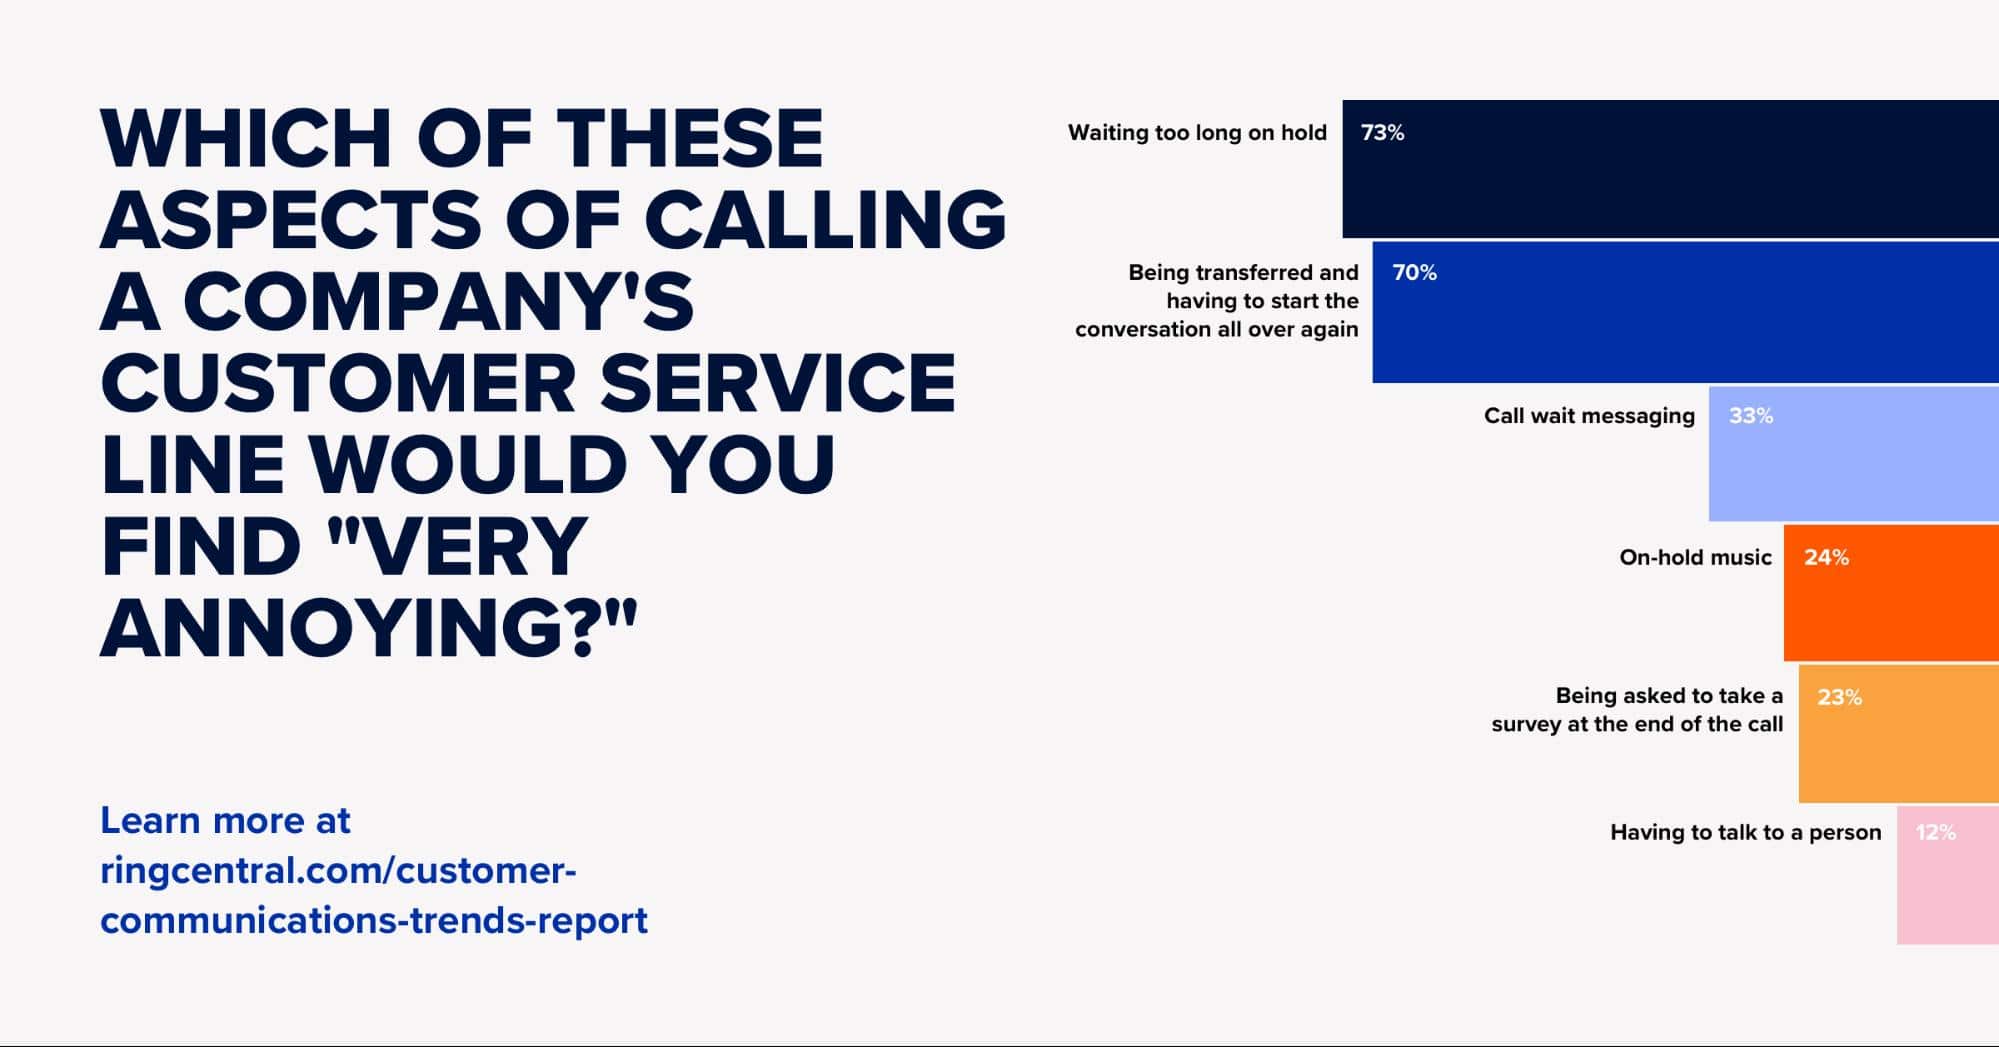 Which of these aspects of calling a company's customer service line would you find "very annoying?"